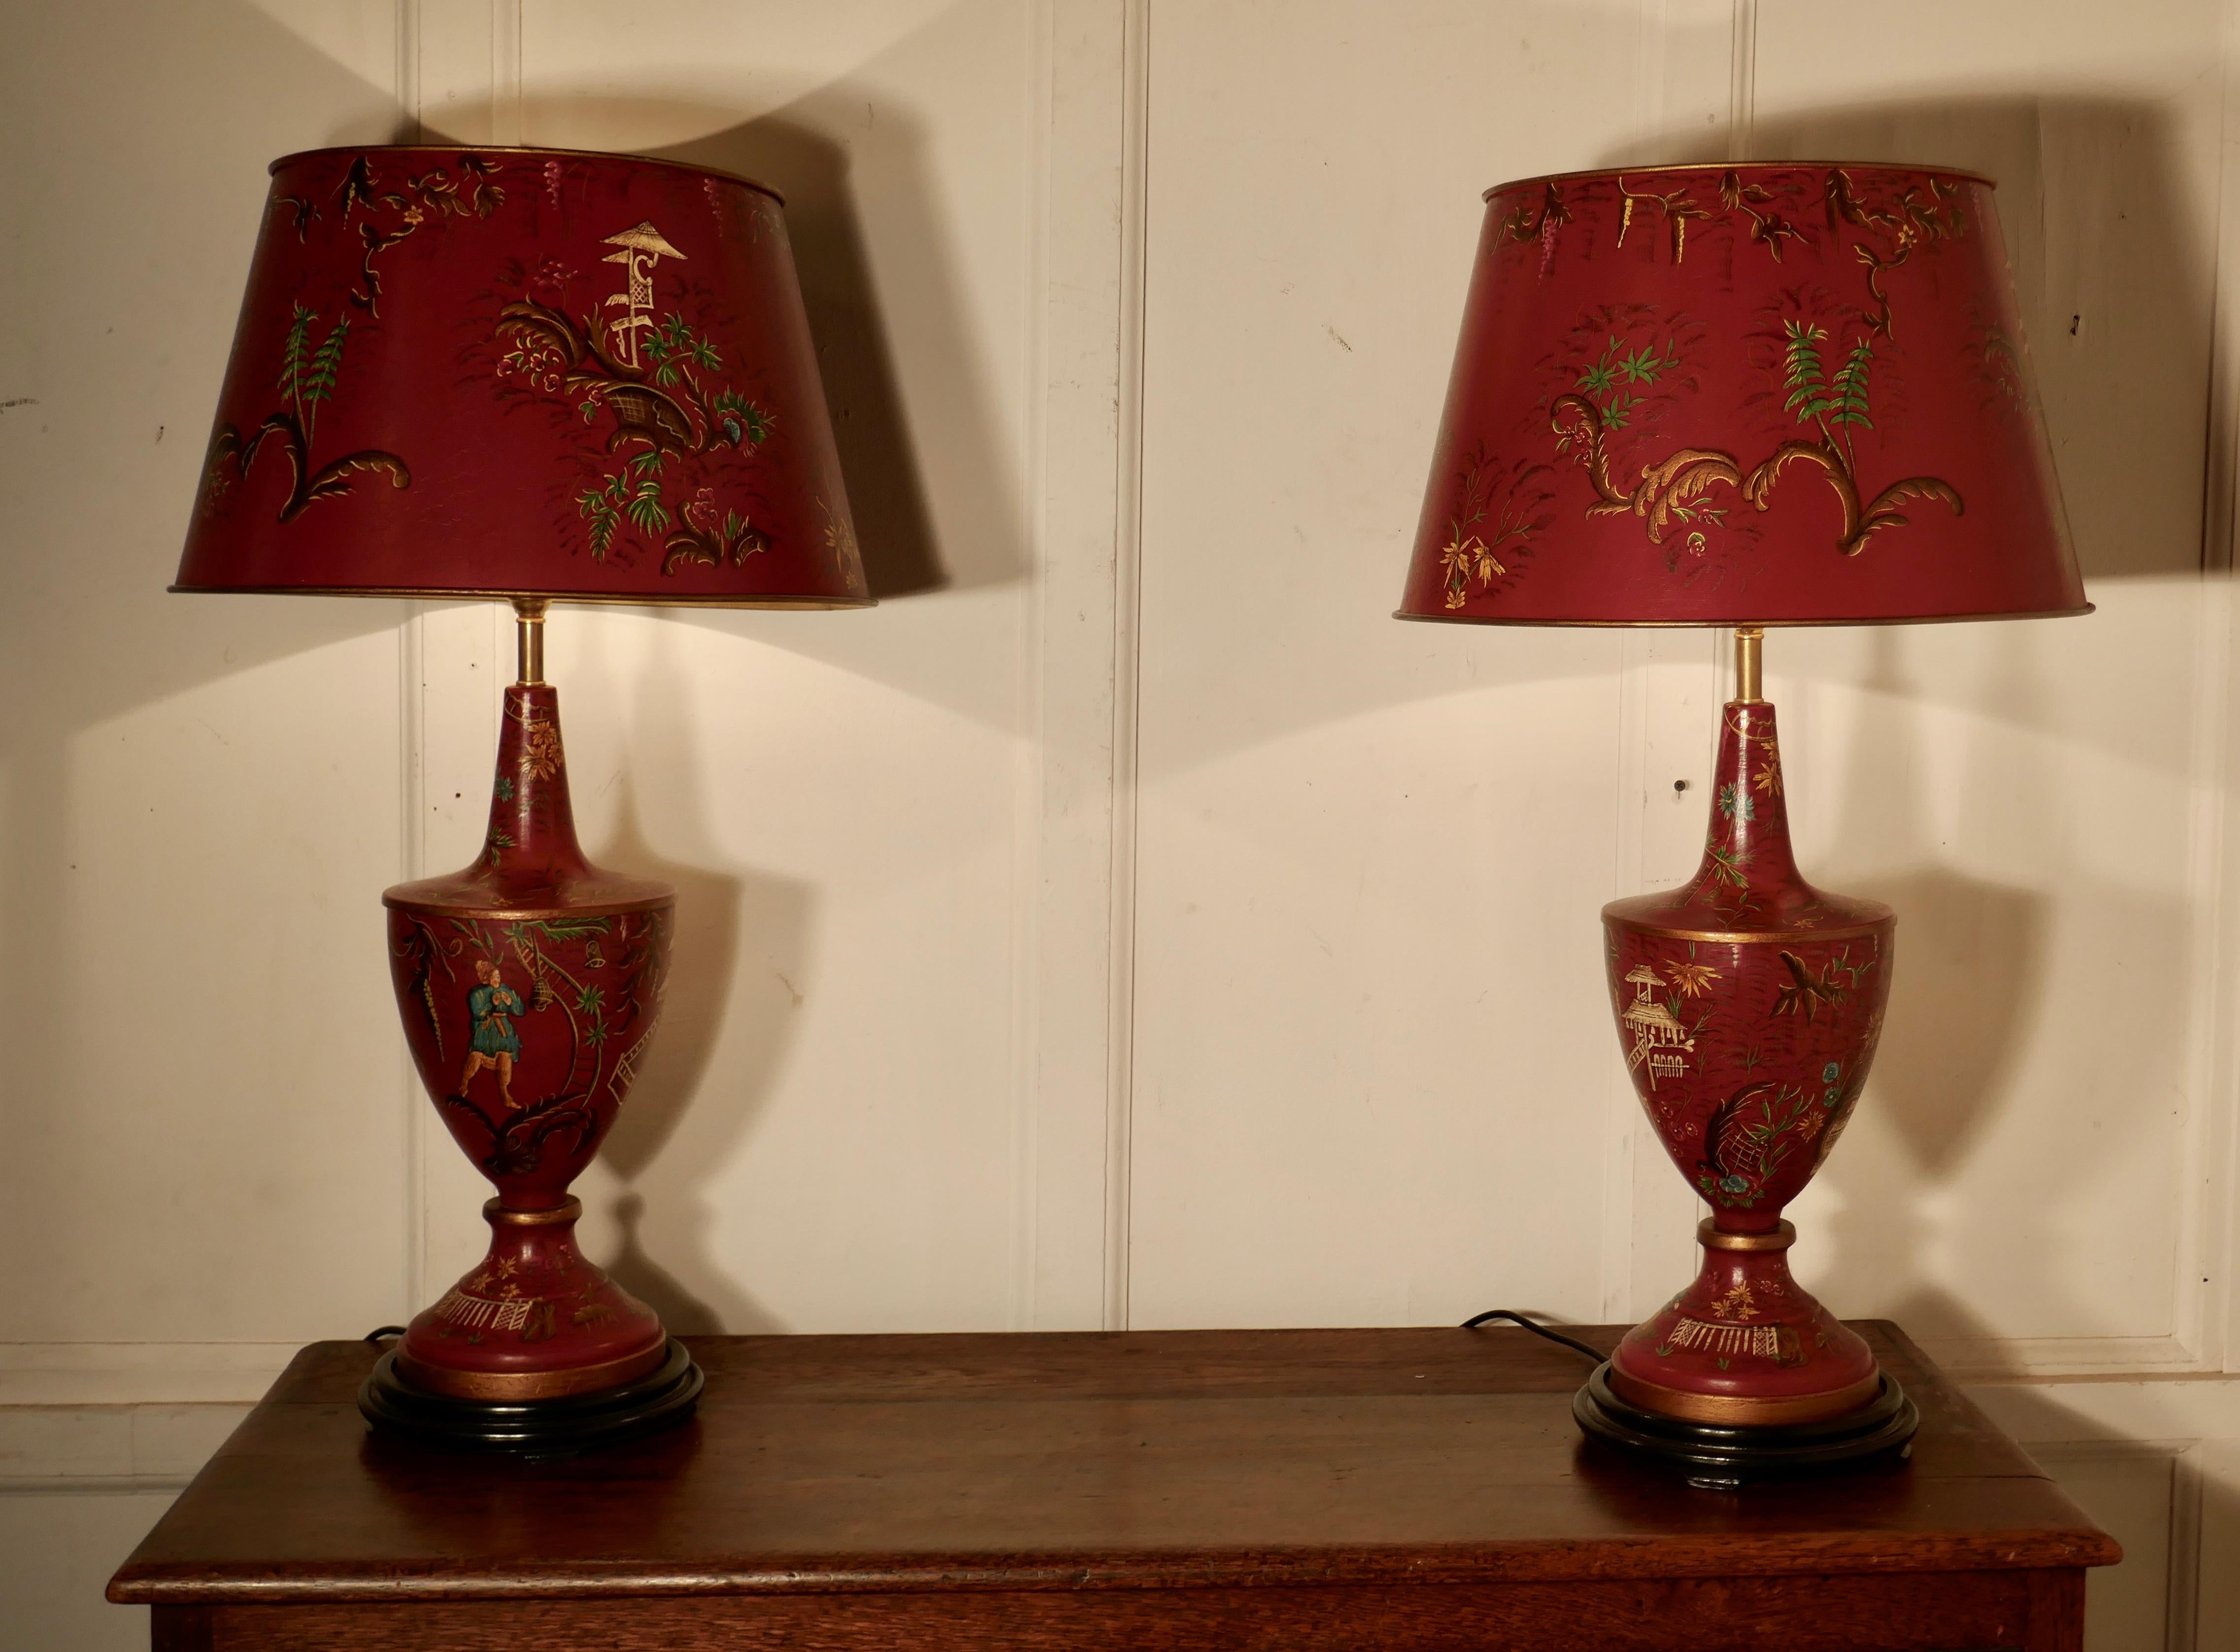 A pair of large red chinoiserie toleware table lamps

The large stunning lamps have matching shades, both lamps and shades have a crackle glaze finish and are hand painted with both color and gold detail
The lamps are fully wired and in very good